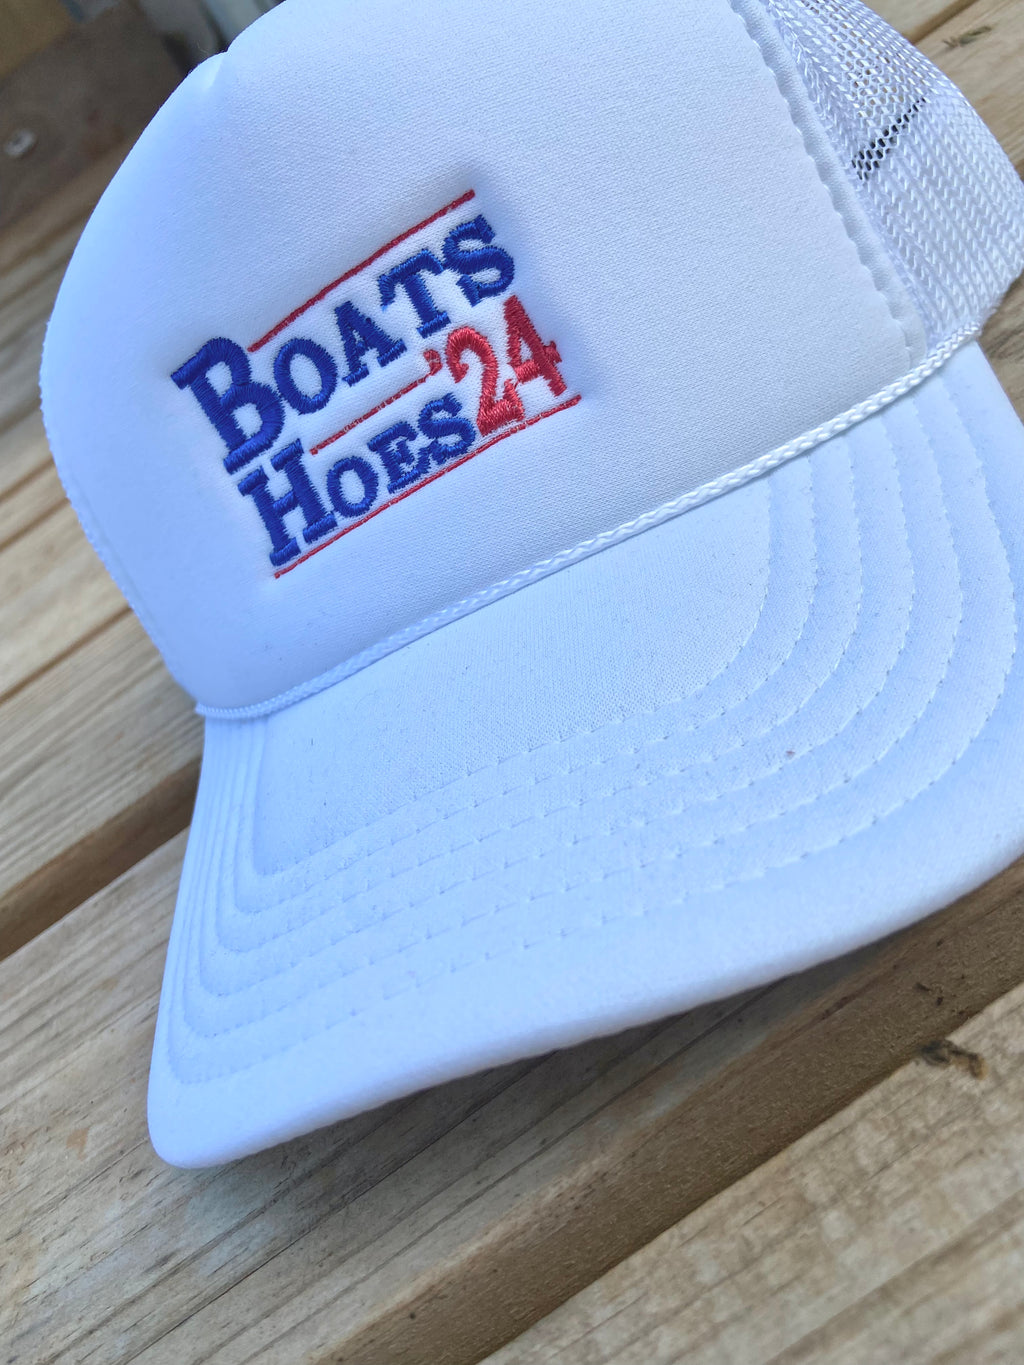 Boats hoes ‘24 white embroidered trucker hat